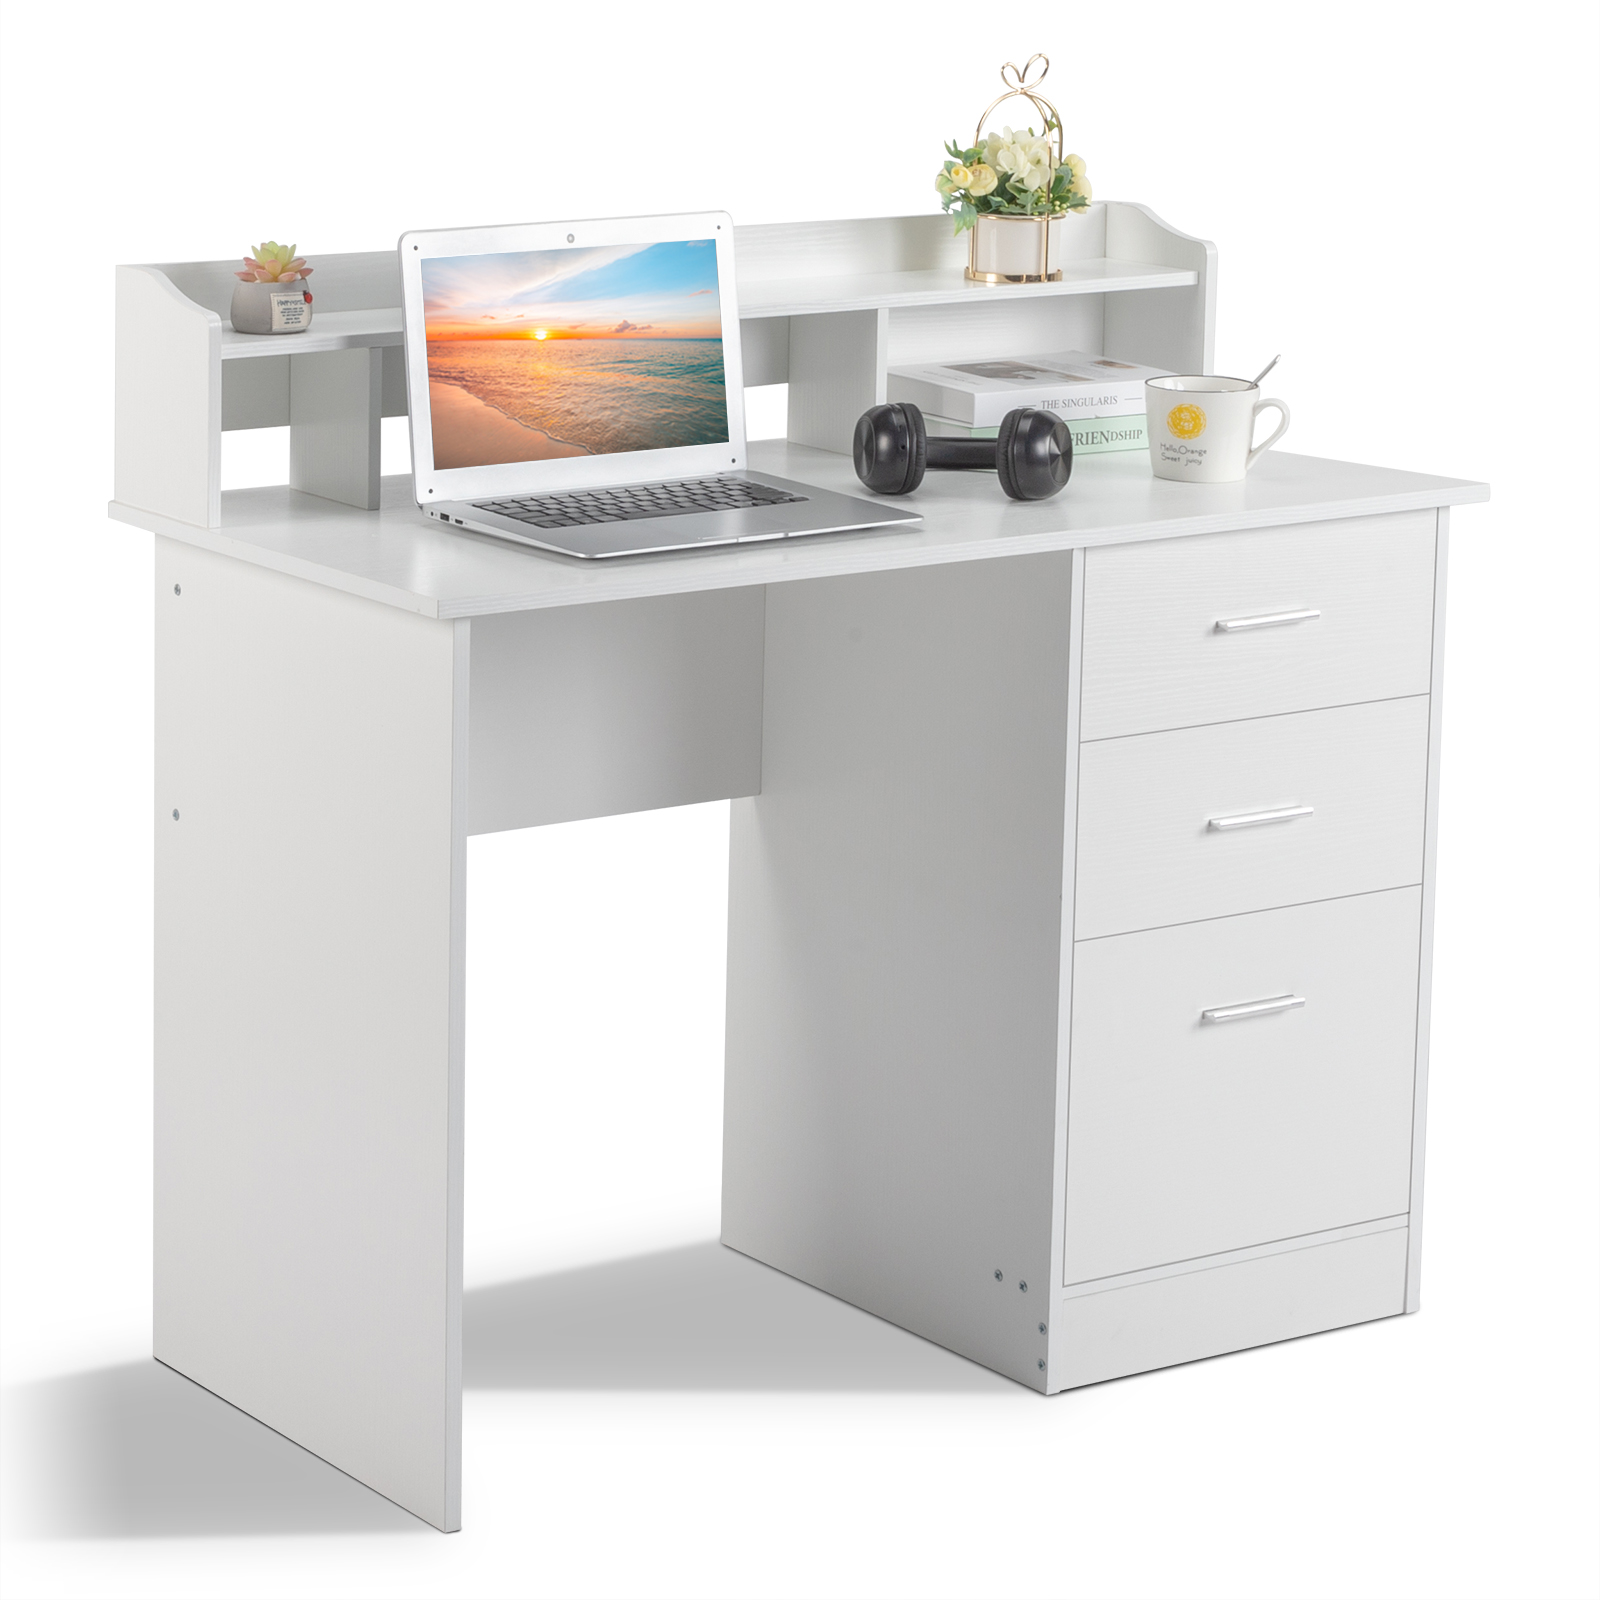 Ktaxon Wood Computer Desk Office Laptop PC Work Table, Writing Desk with 3 Drawers File Cabinet for Letter Size,White - image 5 of 10